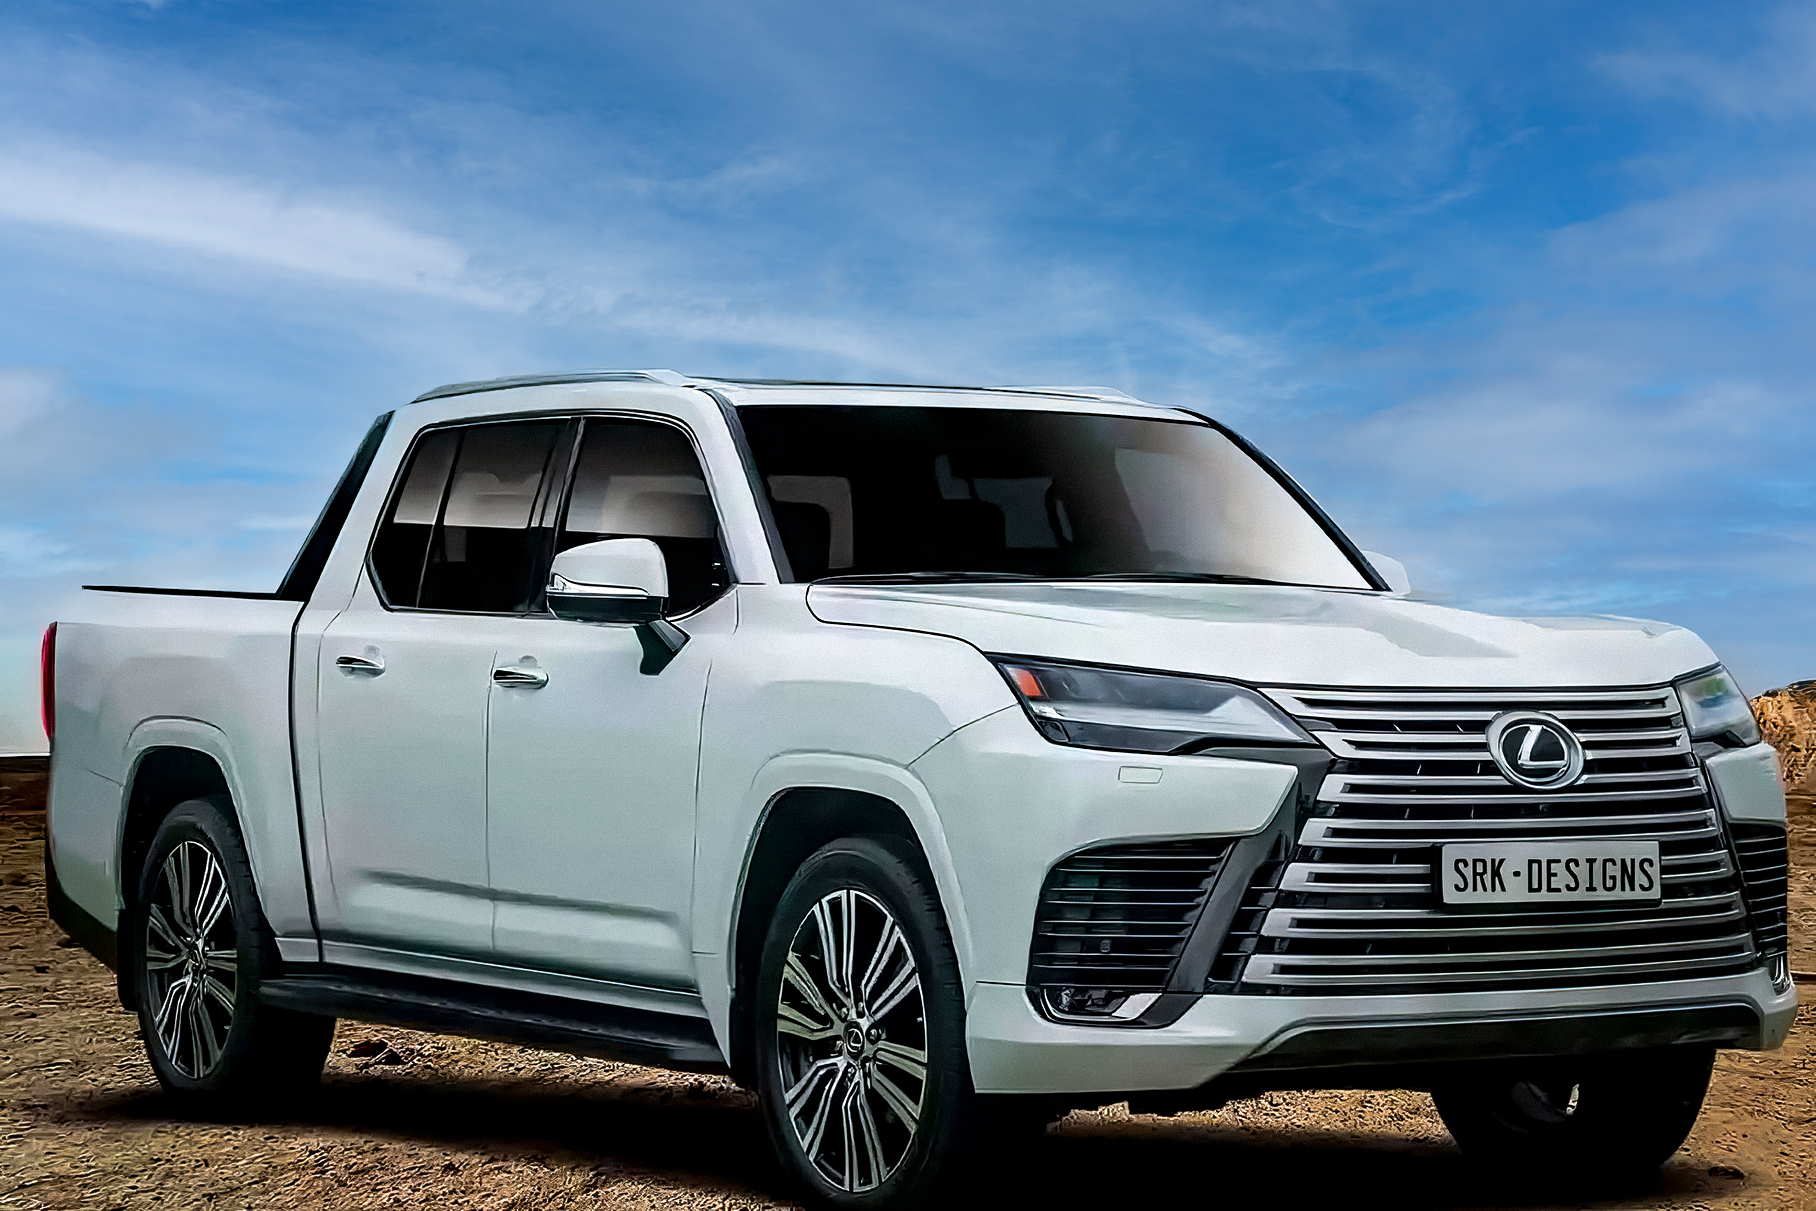 Information about the Lexus pickup truck has appeared